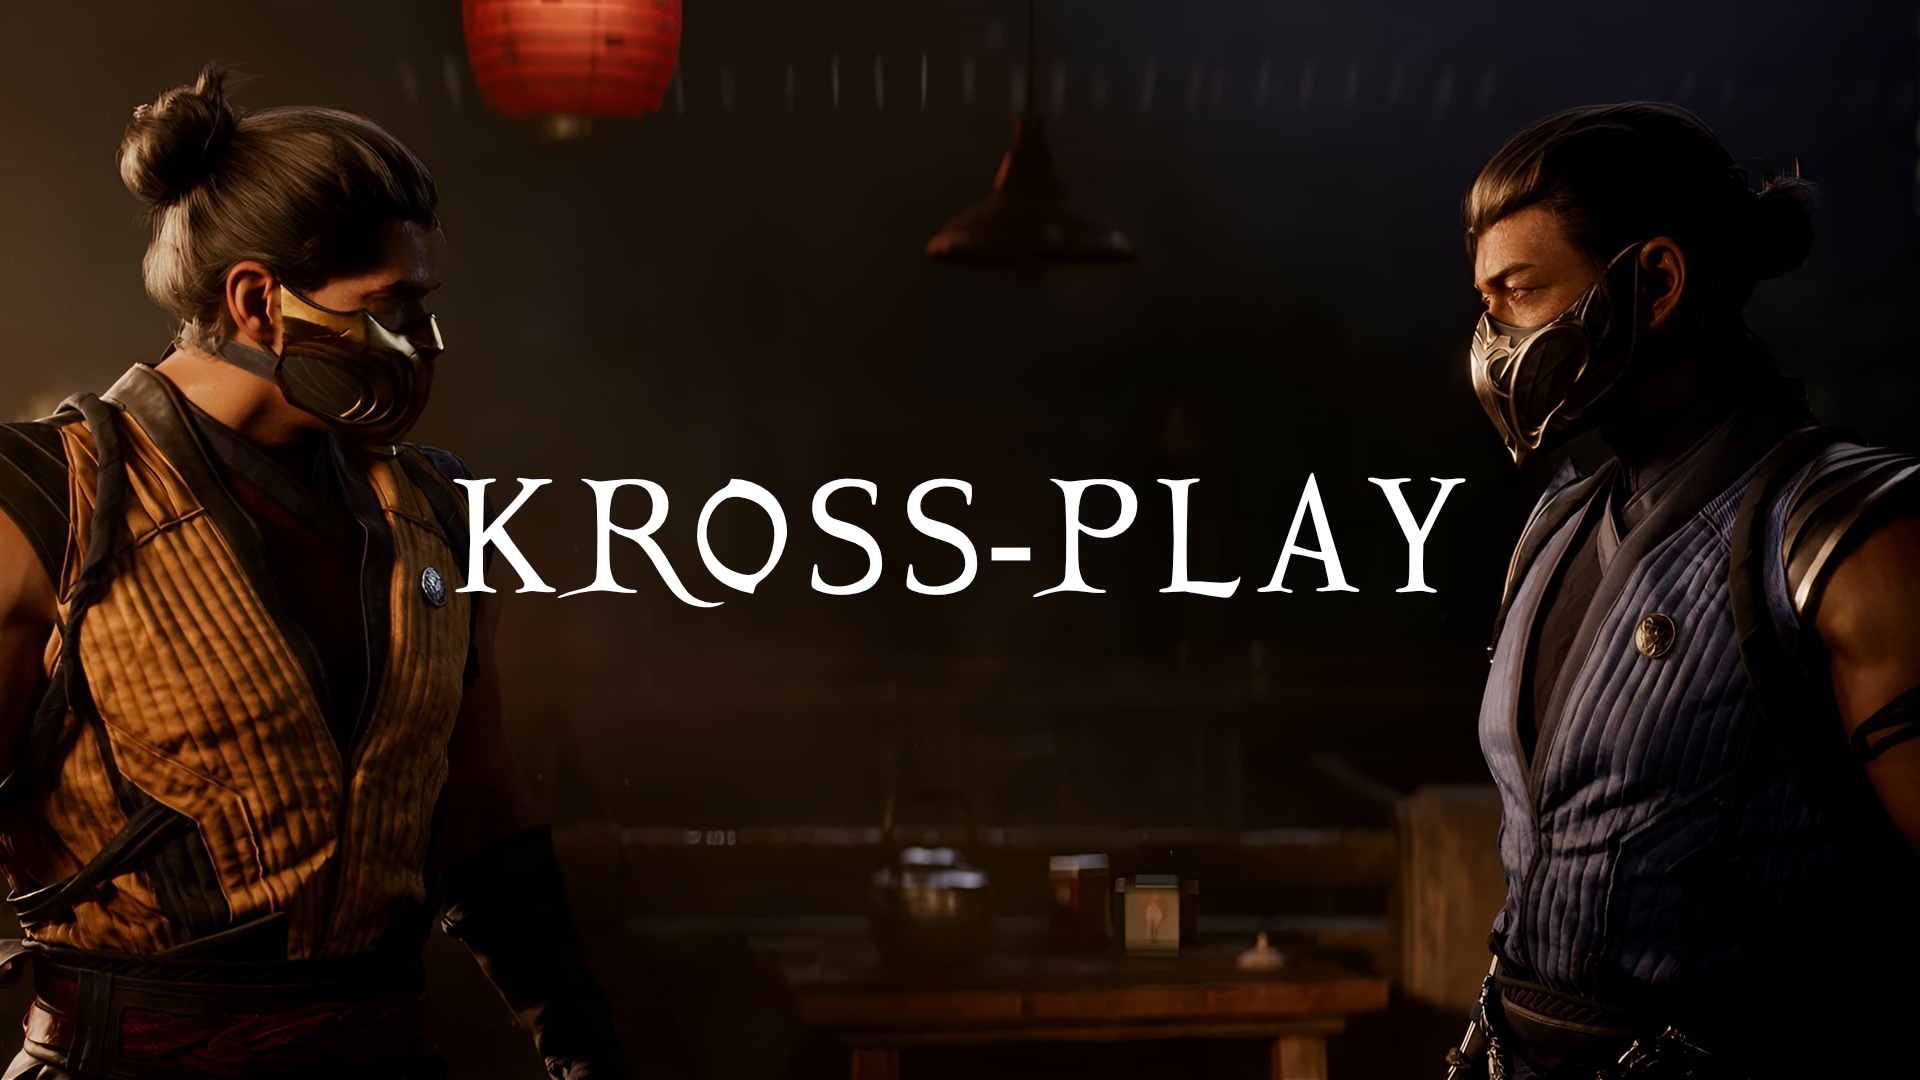 Mortal Kombat 11 cross-play might not come to PC